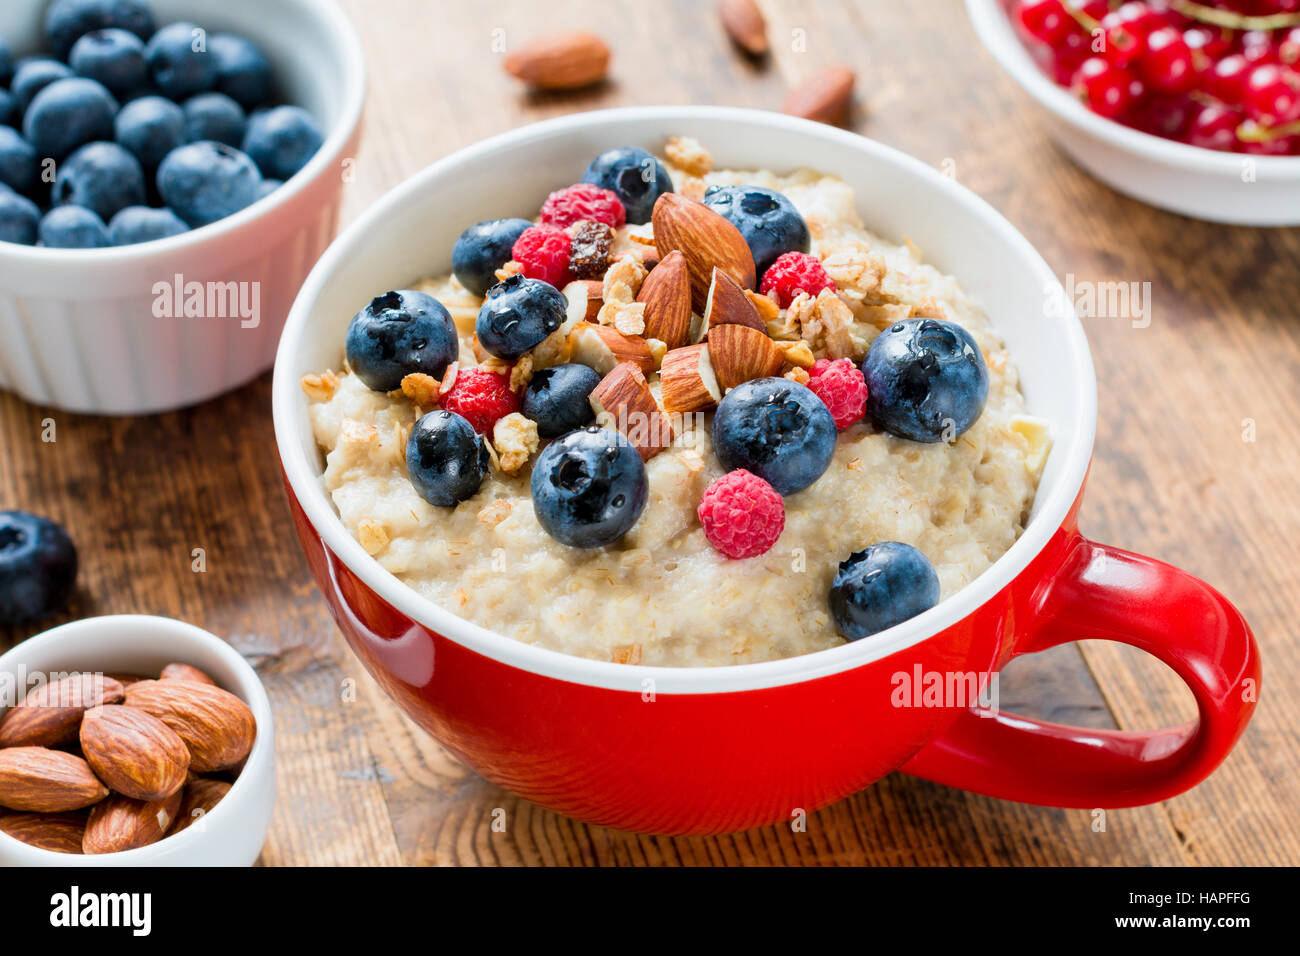 Oatmeal porridge with fruits and nuts for healthy breakfast Stock Photo